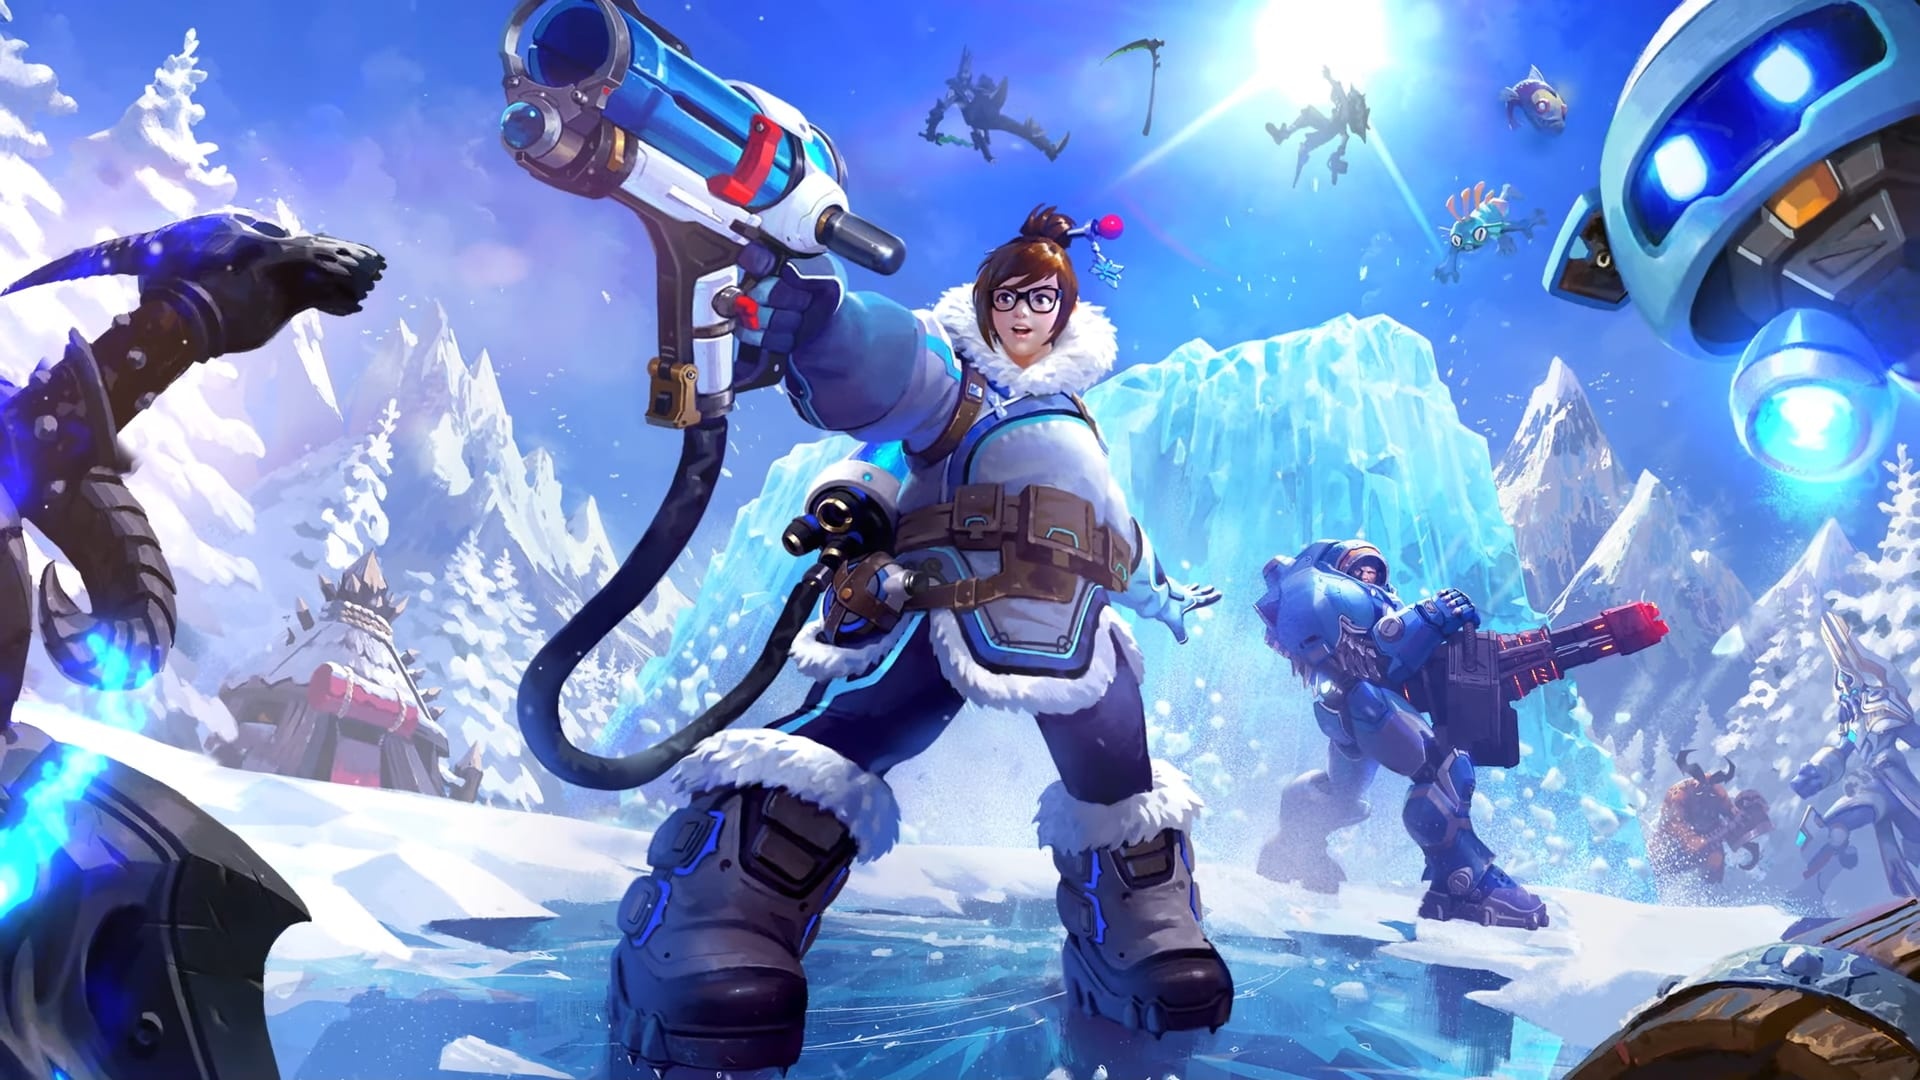 Heroes of the Storm, Mei joins, Overwatch crossover, Blizzard's team-based shooter, 1920x1080 Full HD Desktop